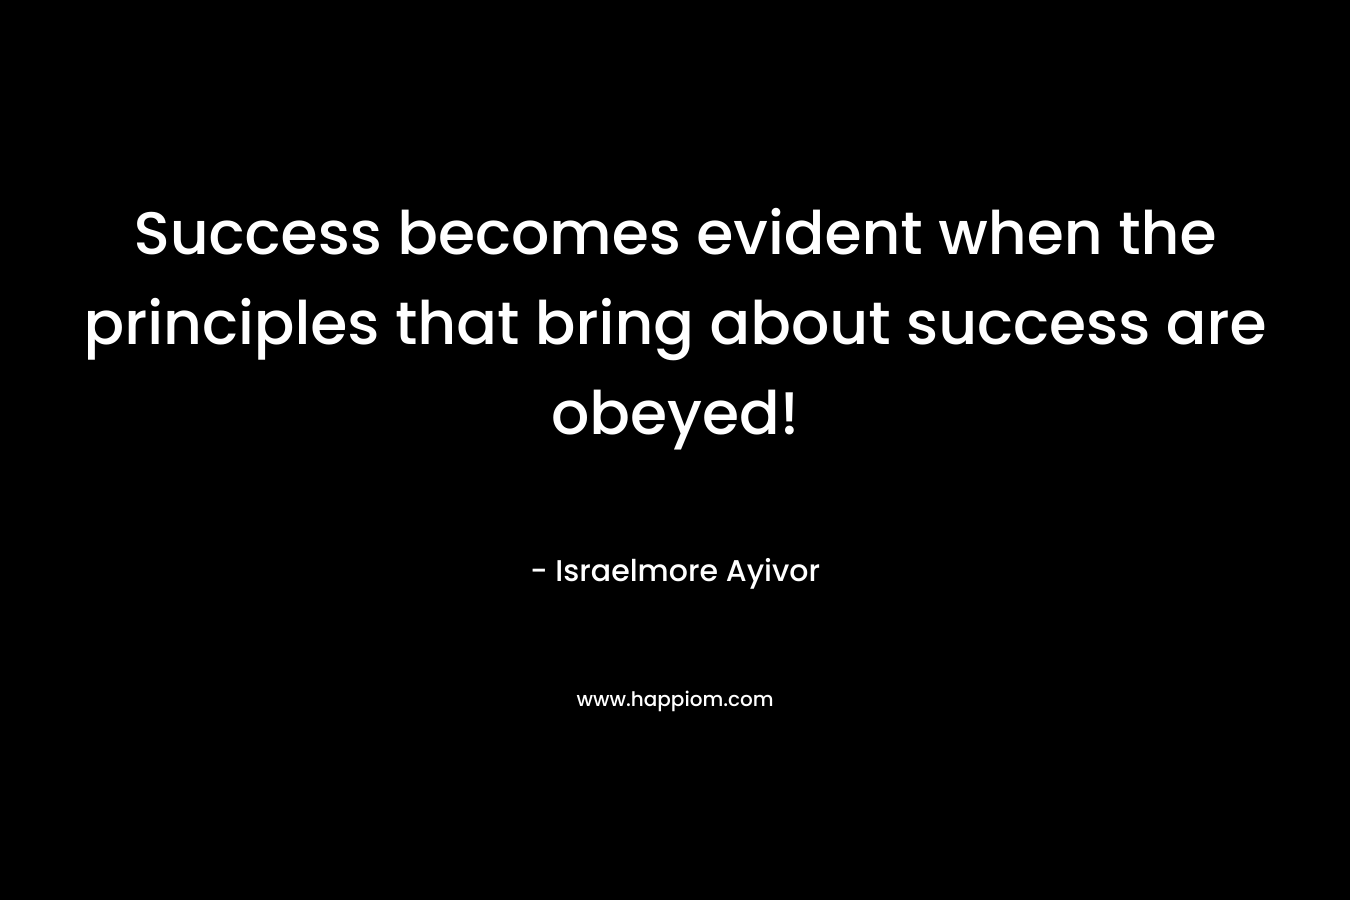 Success becomes evident when the principles that bring about success are obeyed!